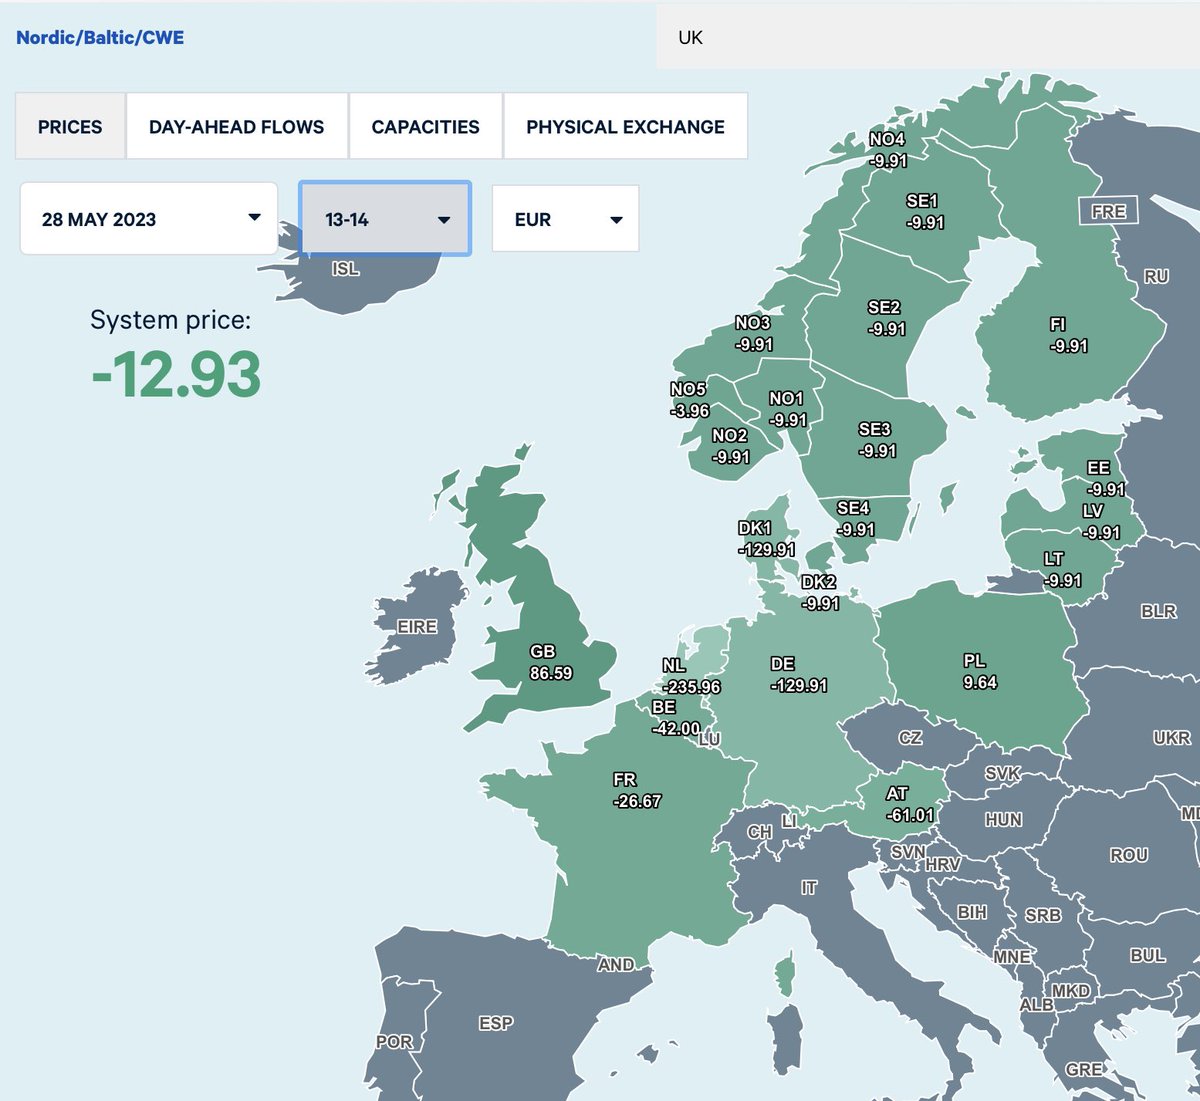 Wholesale #Powerprices are even more crazy today…we will see negative prices across all of Europe except for #GB and #Poland. In the #Netherlands power prices are expected to hit -EUR235/MWh, with #Germany at -EUR129/MWh at lunchtime today.  This is nuts…